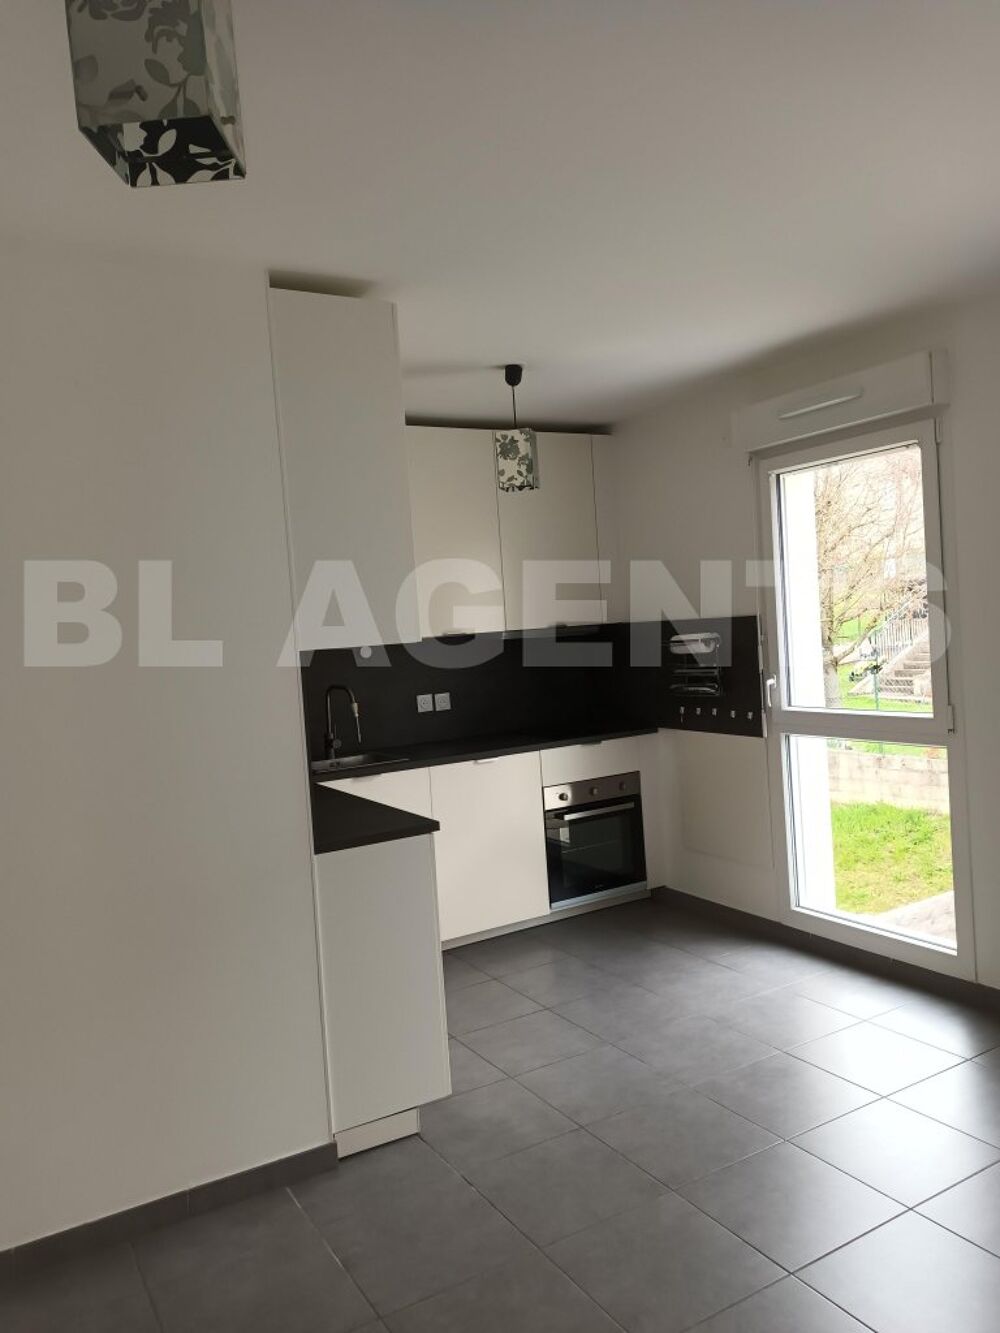 Vente Appartement Appartement 2 pice(s) 40 m2 Chateau-thierry